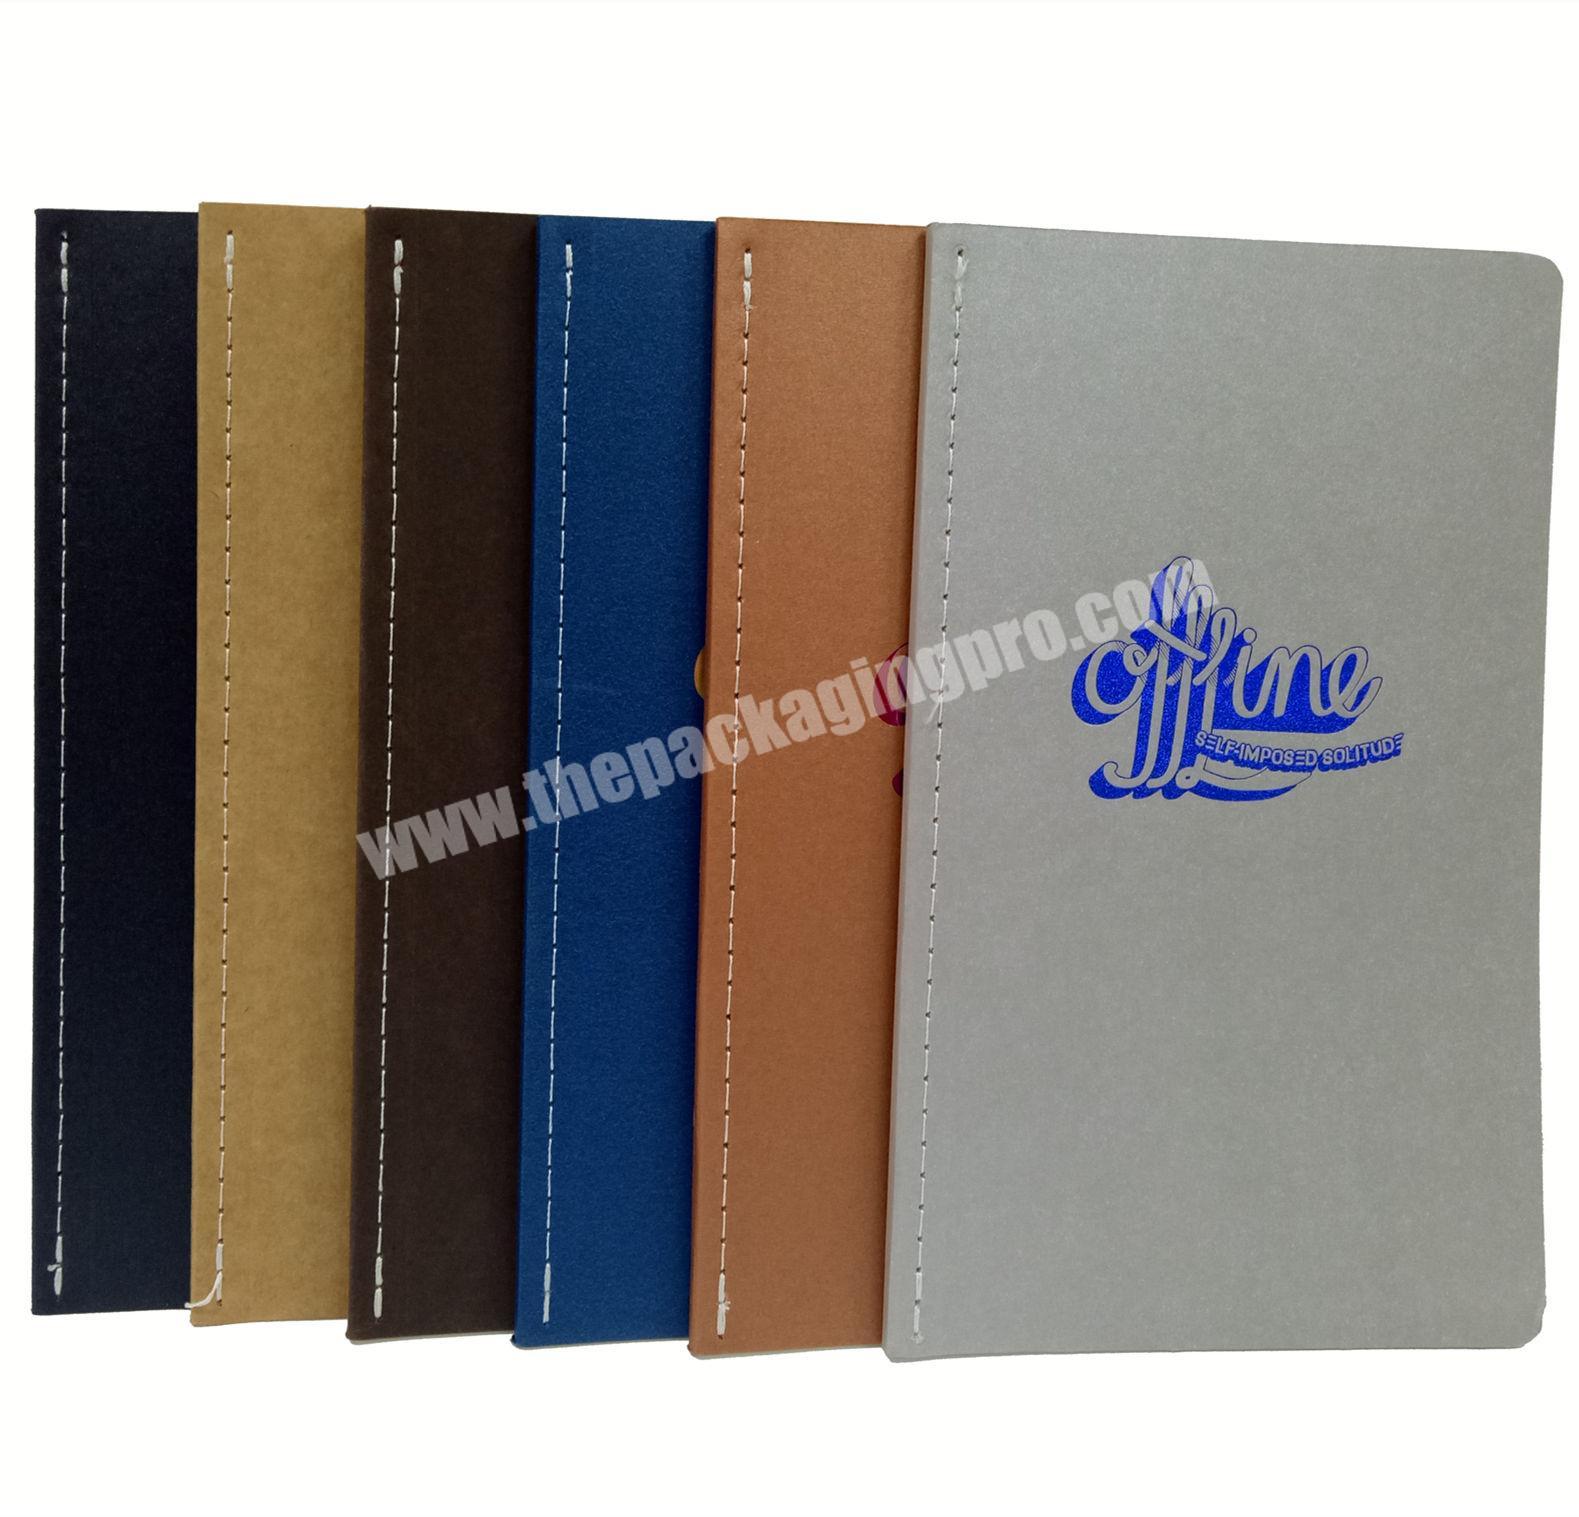 Hot sale to do list planner kraft cover diary paper notebook vintage journal